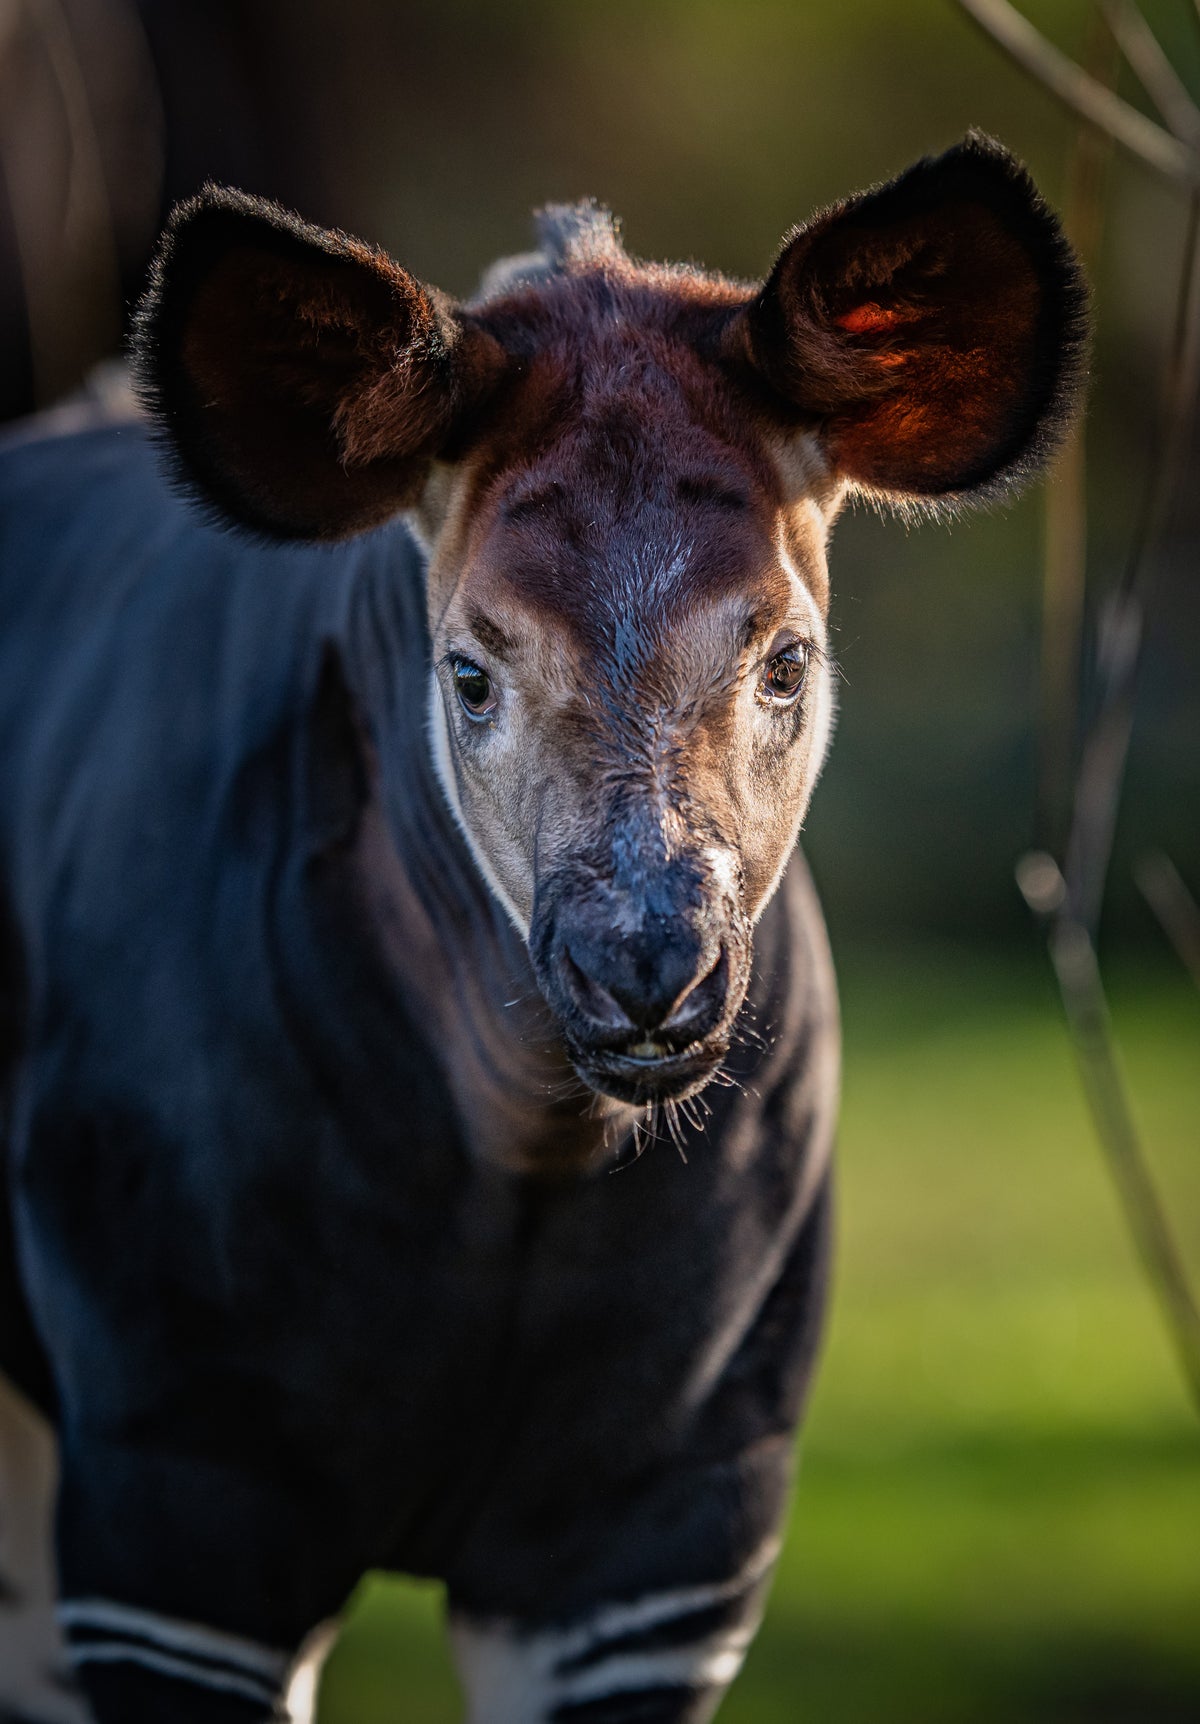 Rare okapi calf steps outside for the first time | The Independent